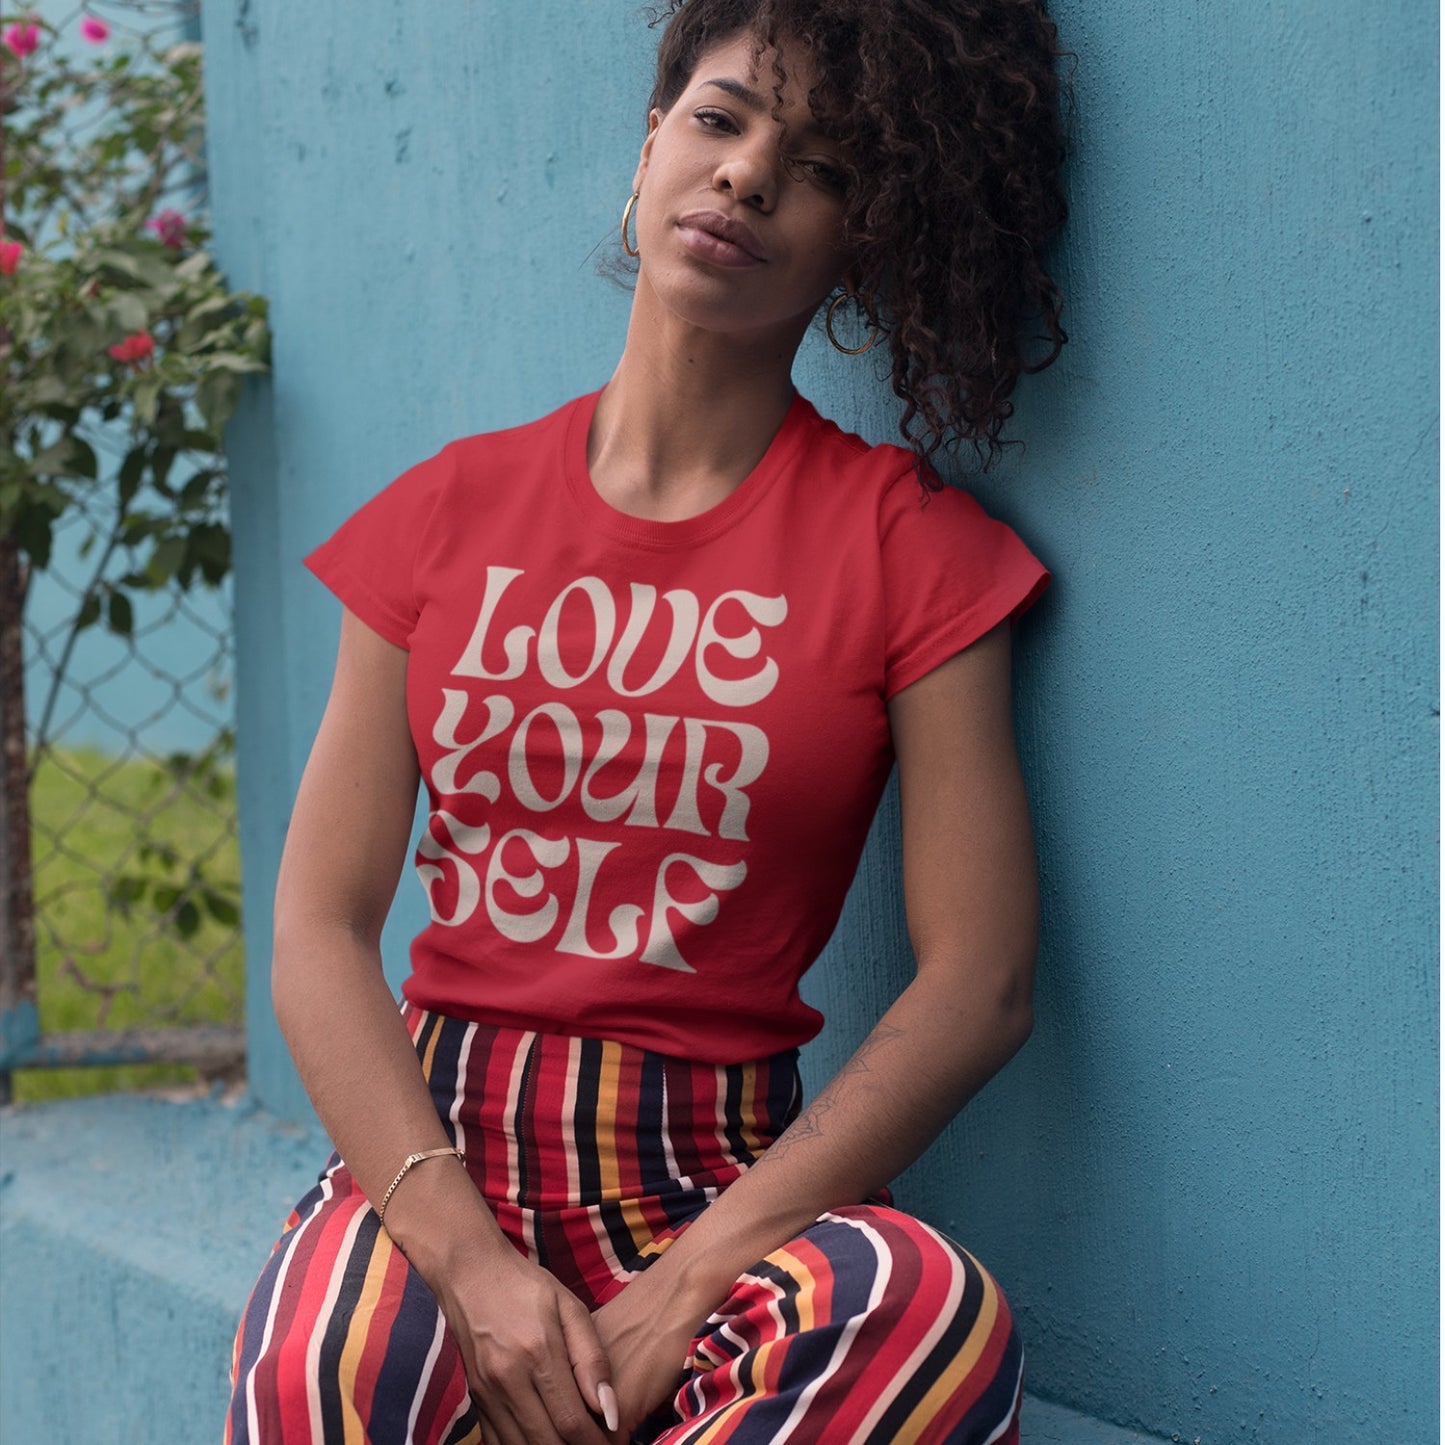 Love Your Self Unisex t-shirt, Love Yourself Message